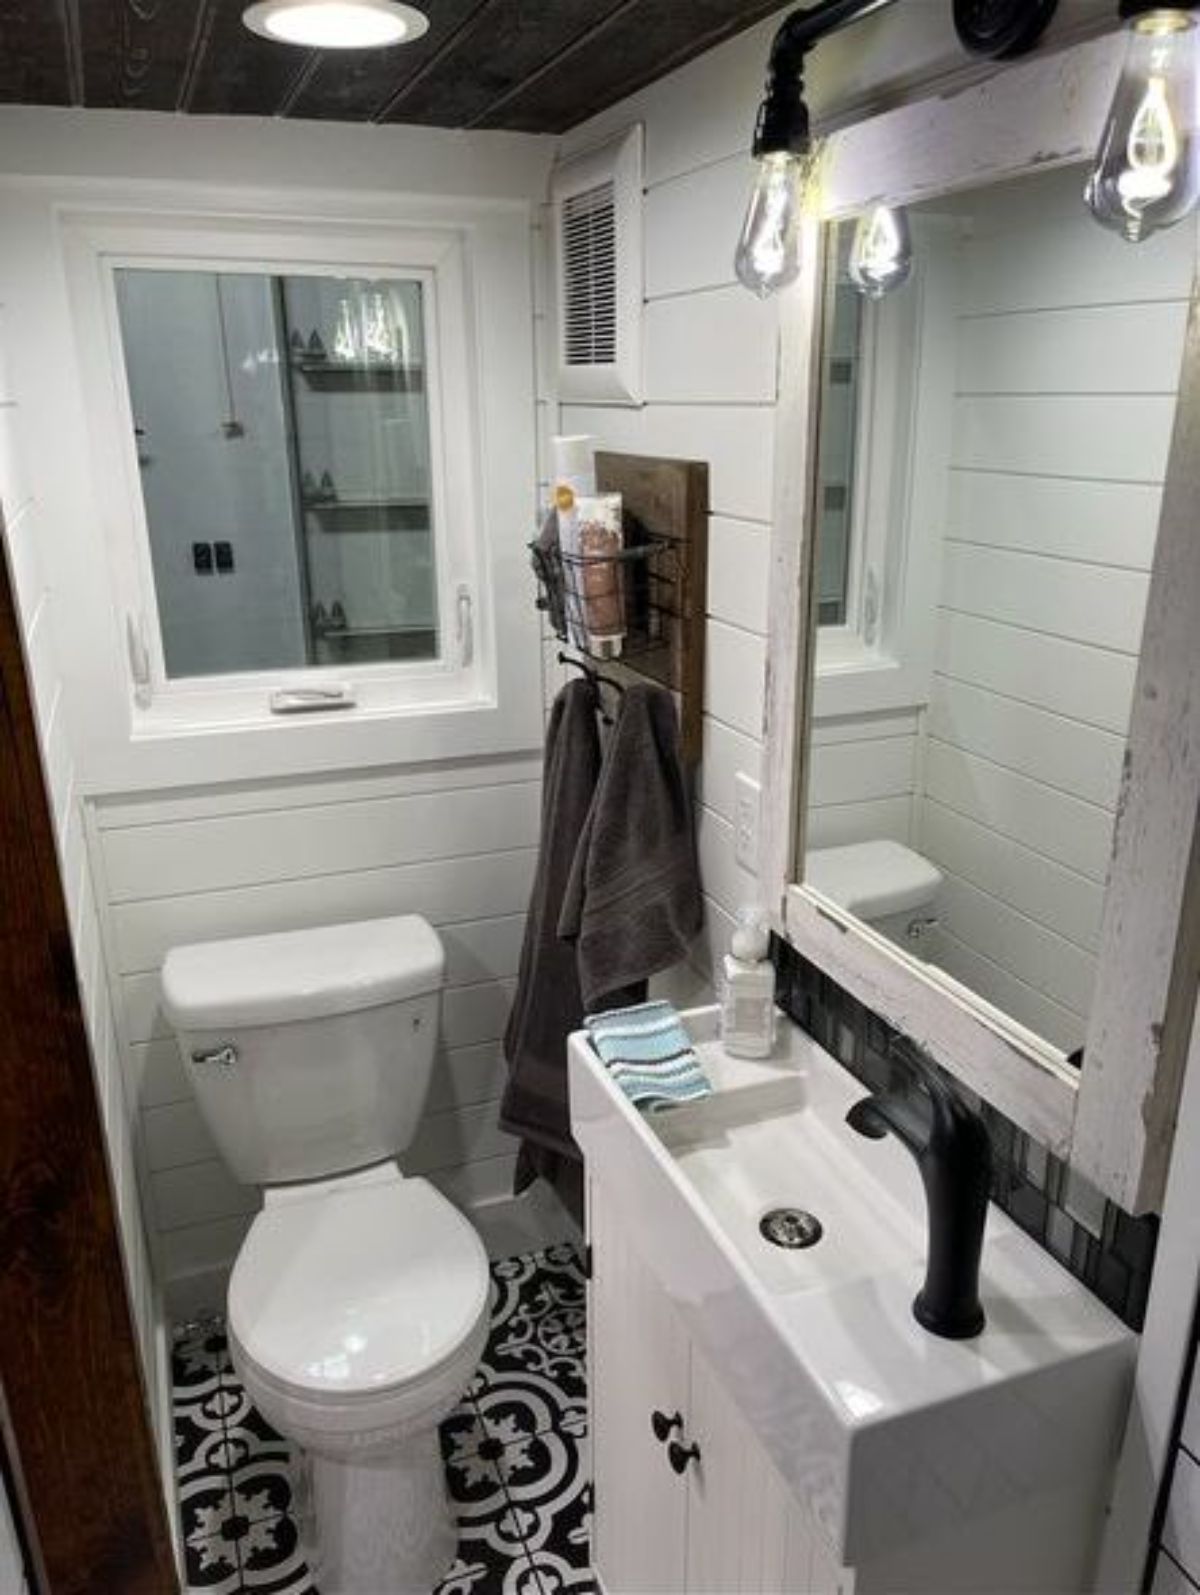 Toilet and sink of Modern Tiny Home